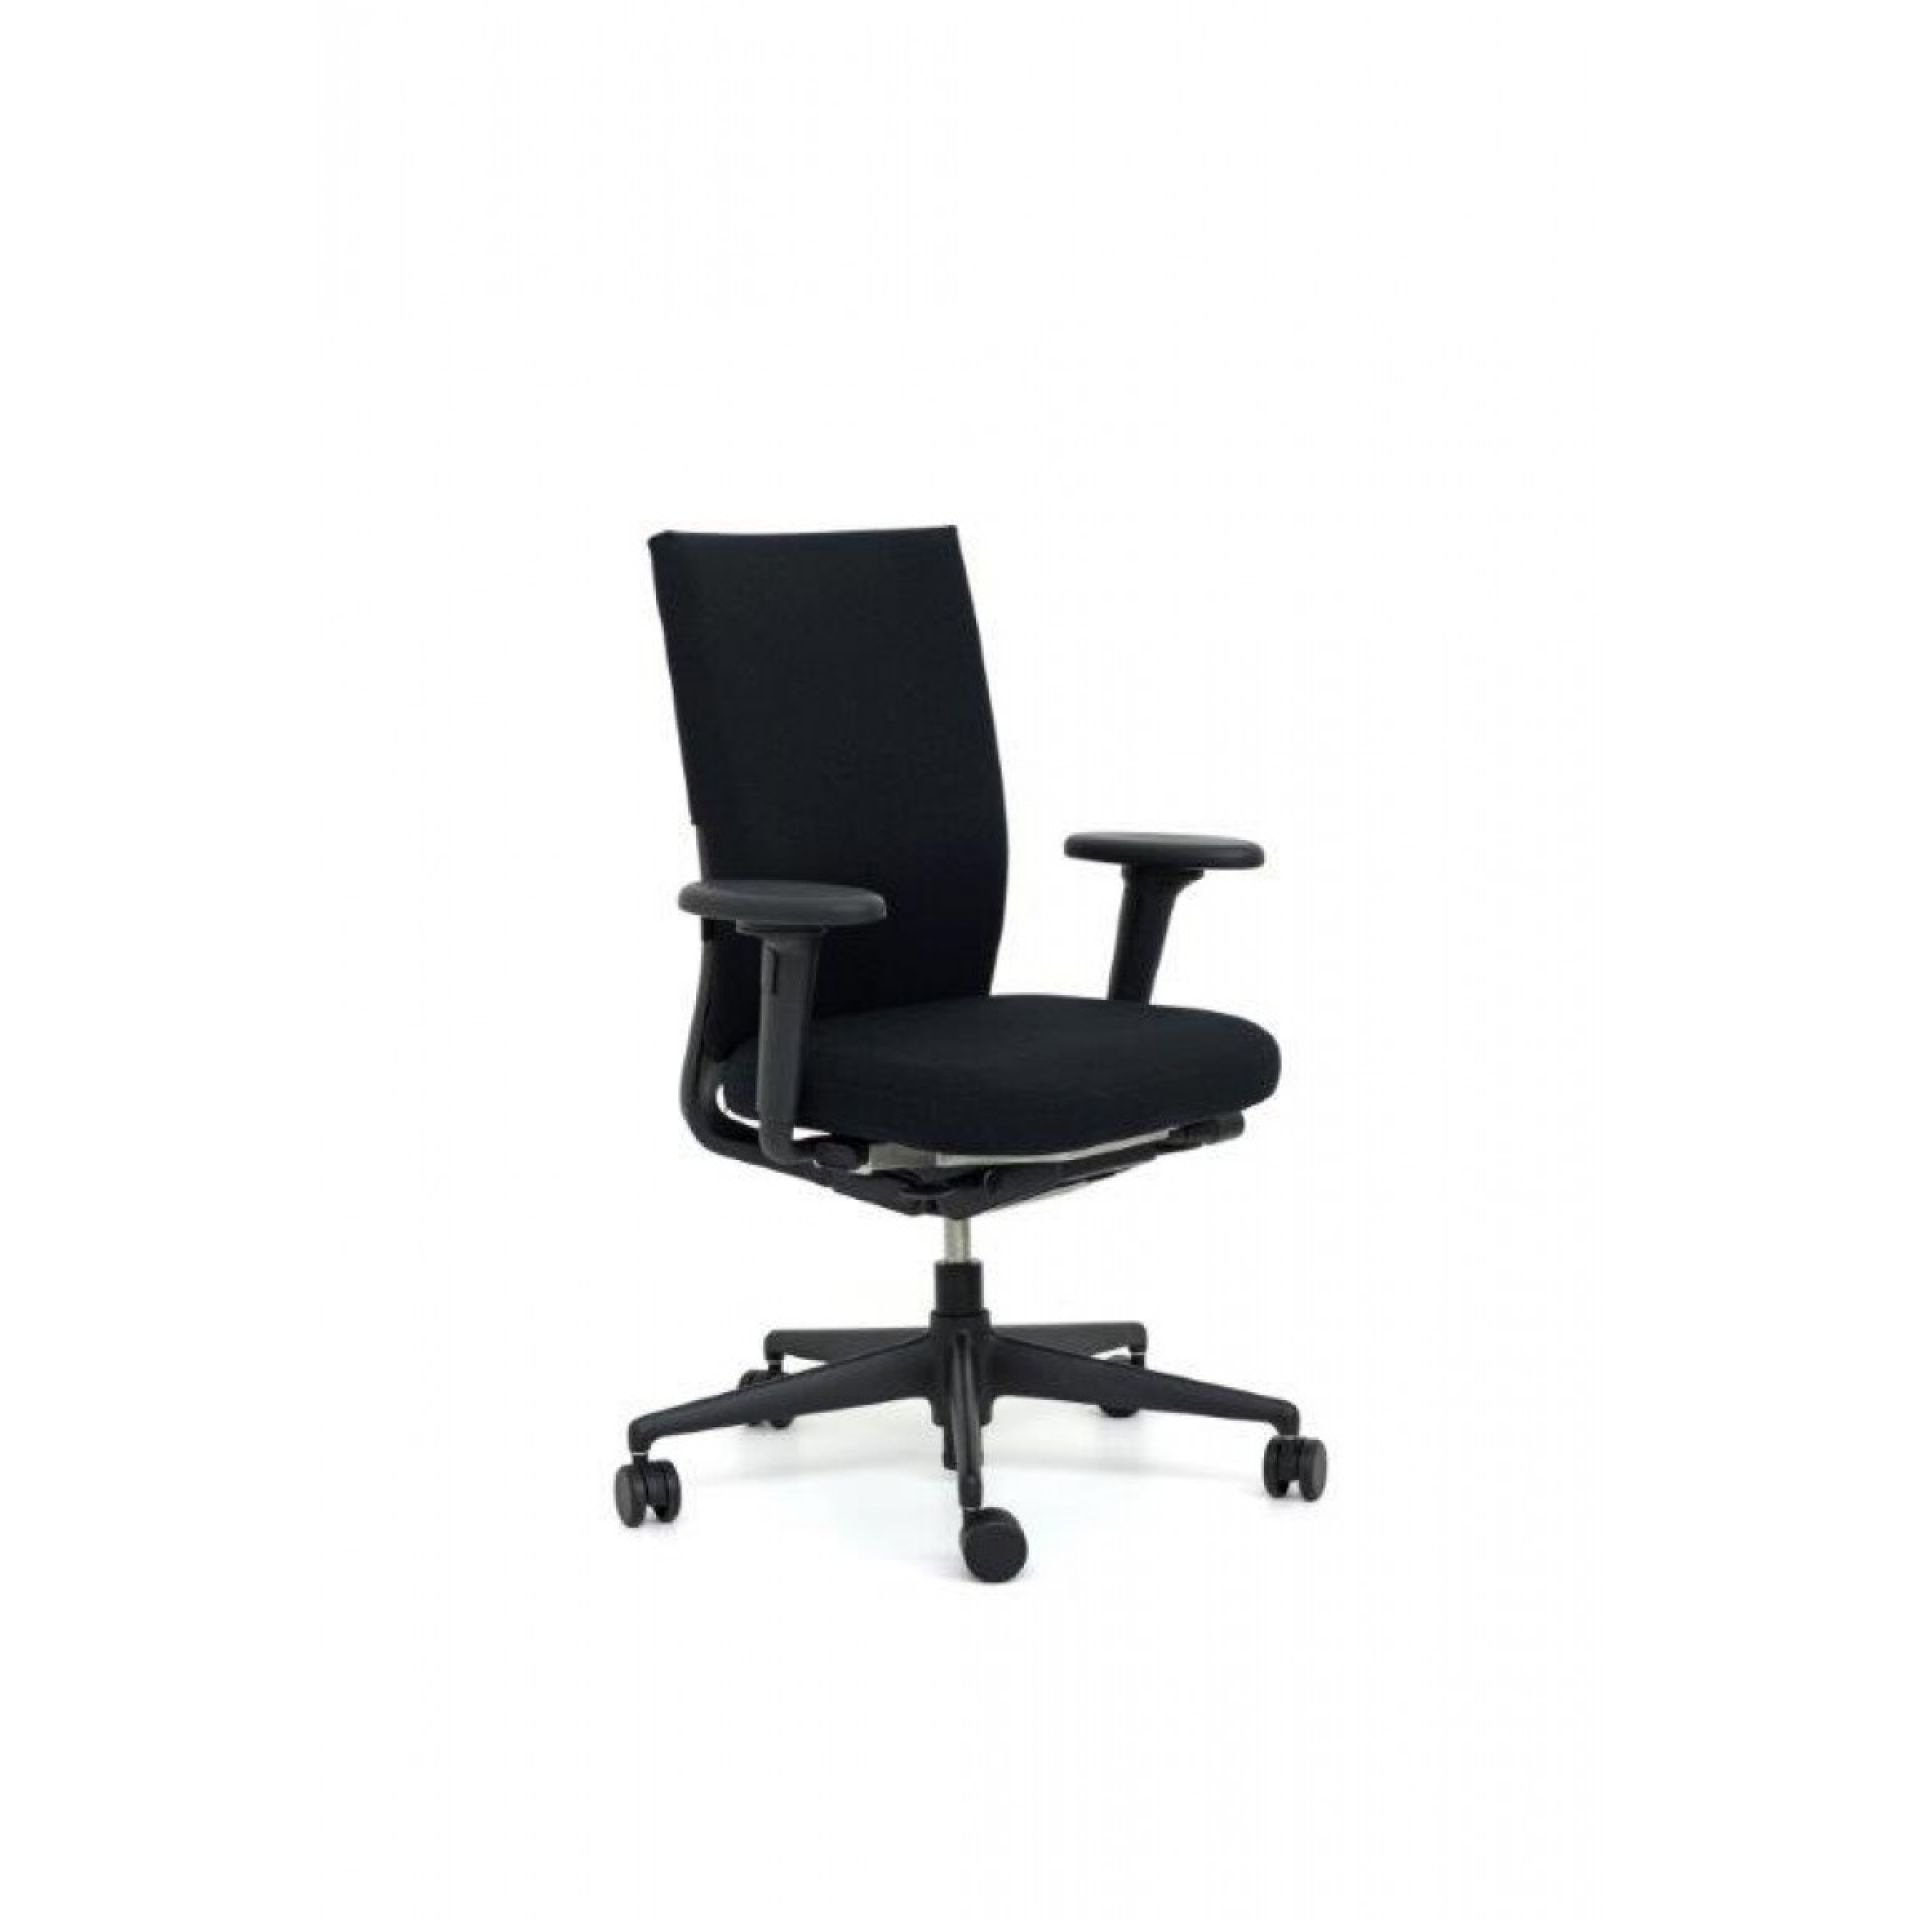 ID Chair - ID Soft - Black Special Edition - Swivel chair Vitra